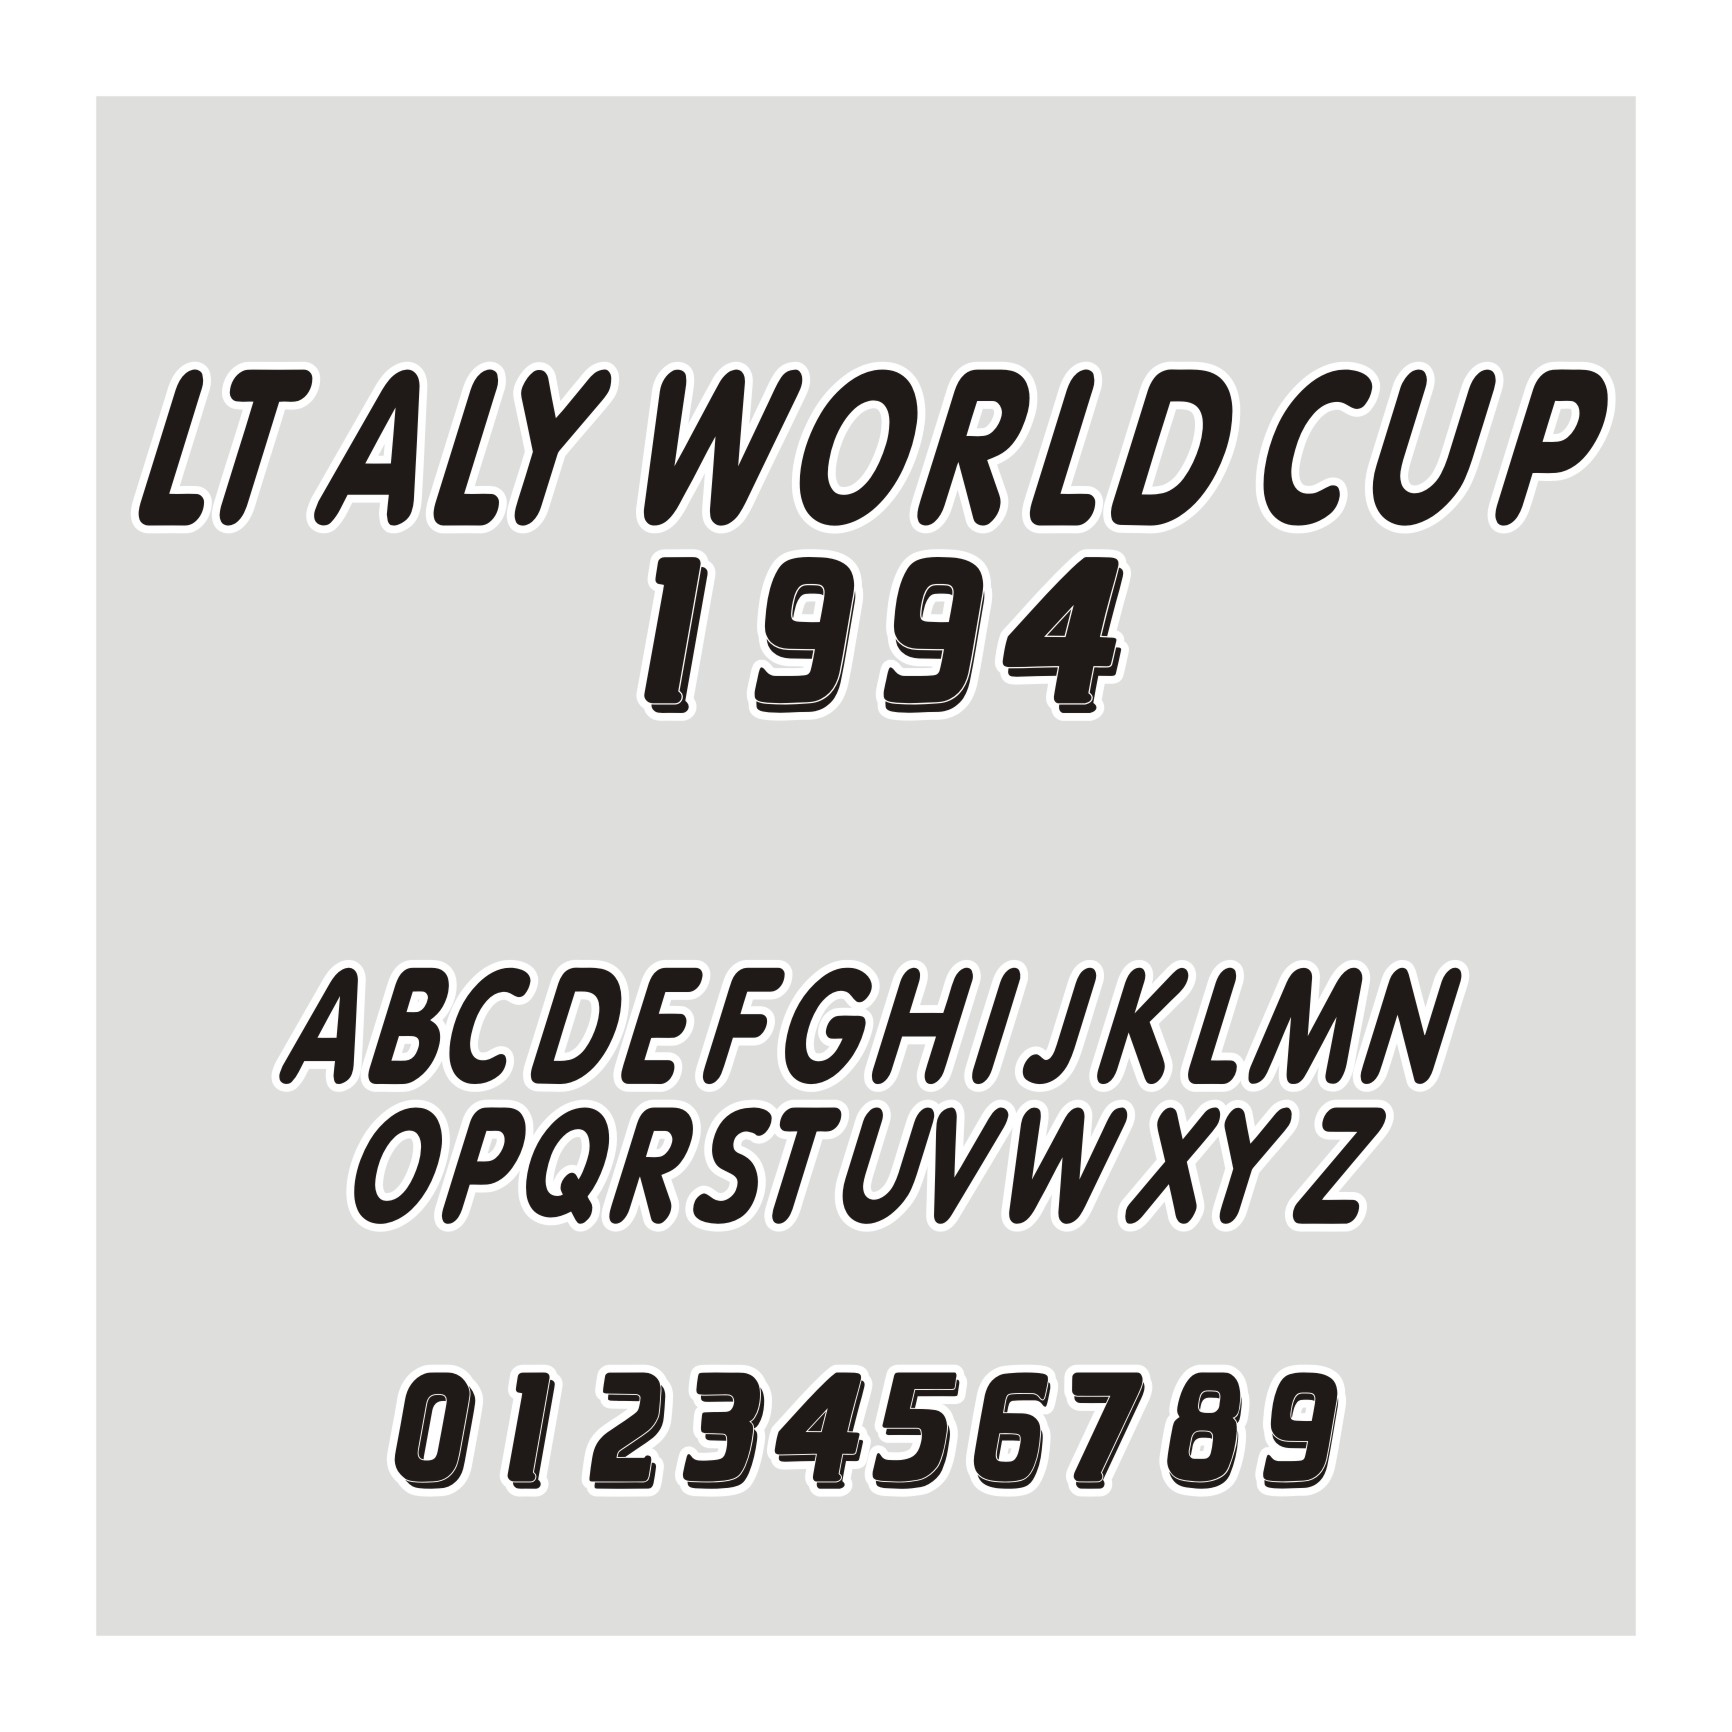 ltaly World Cup 1994